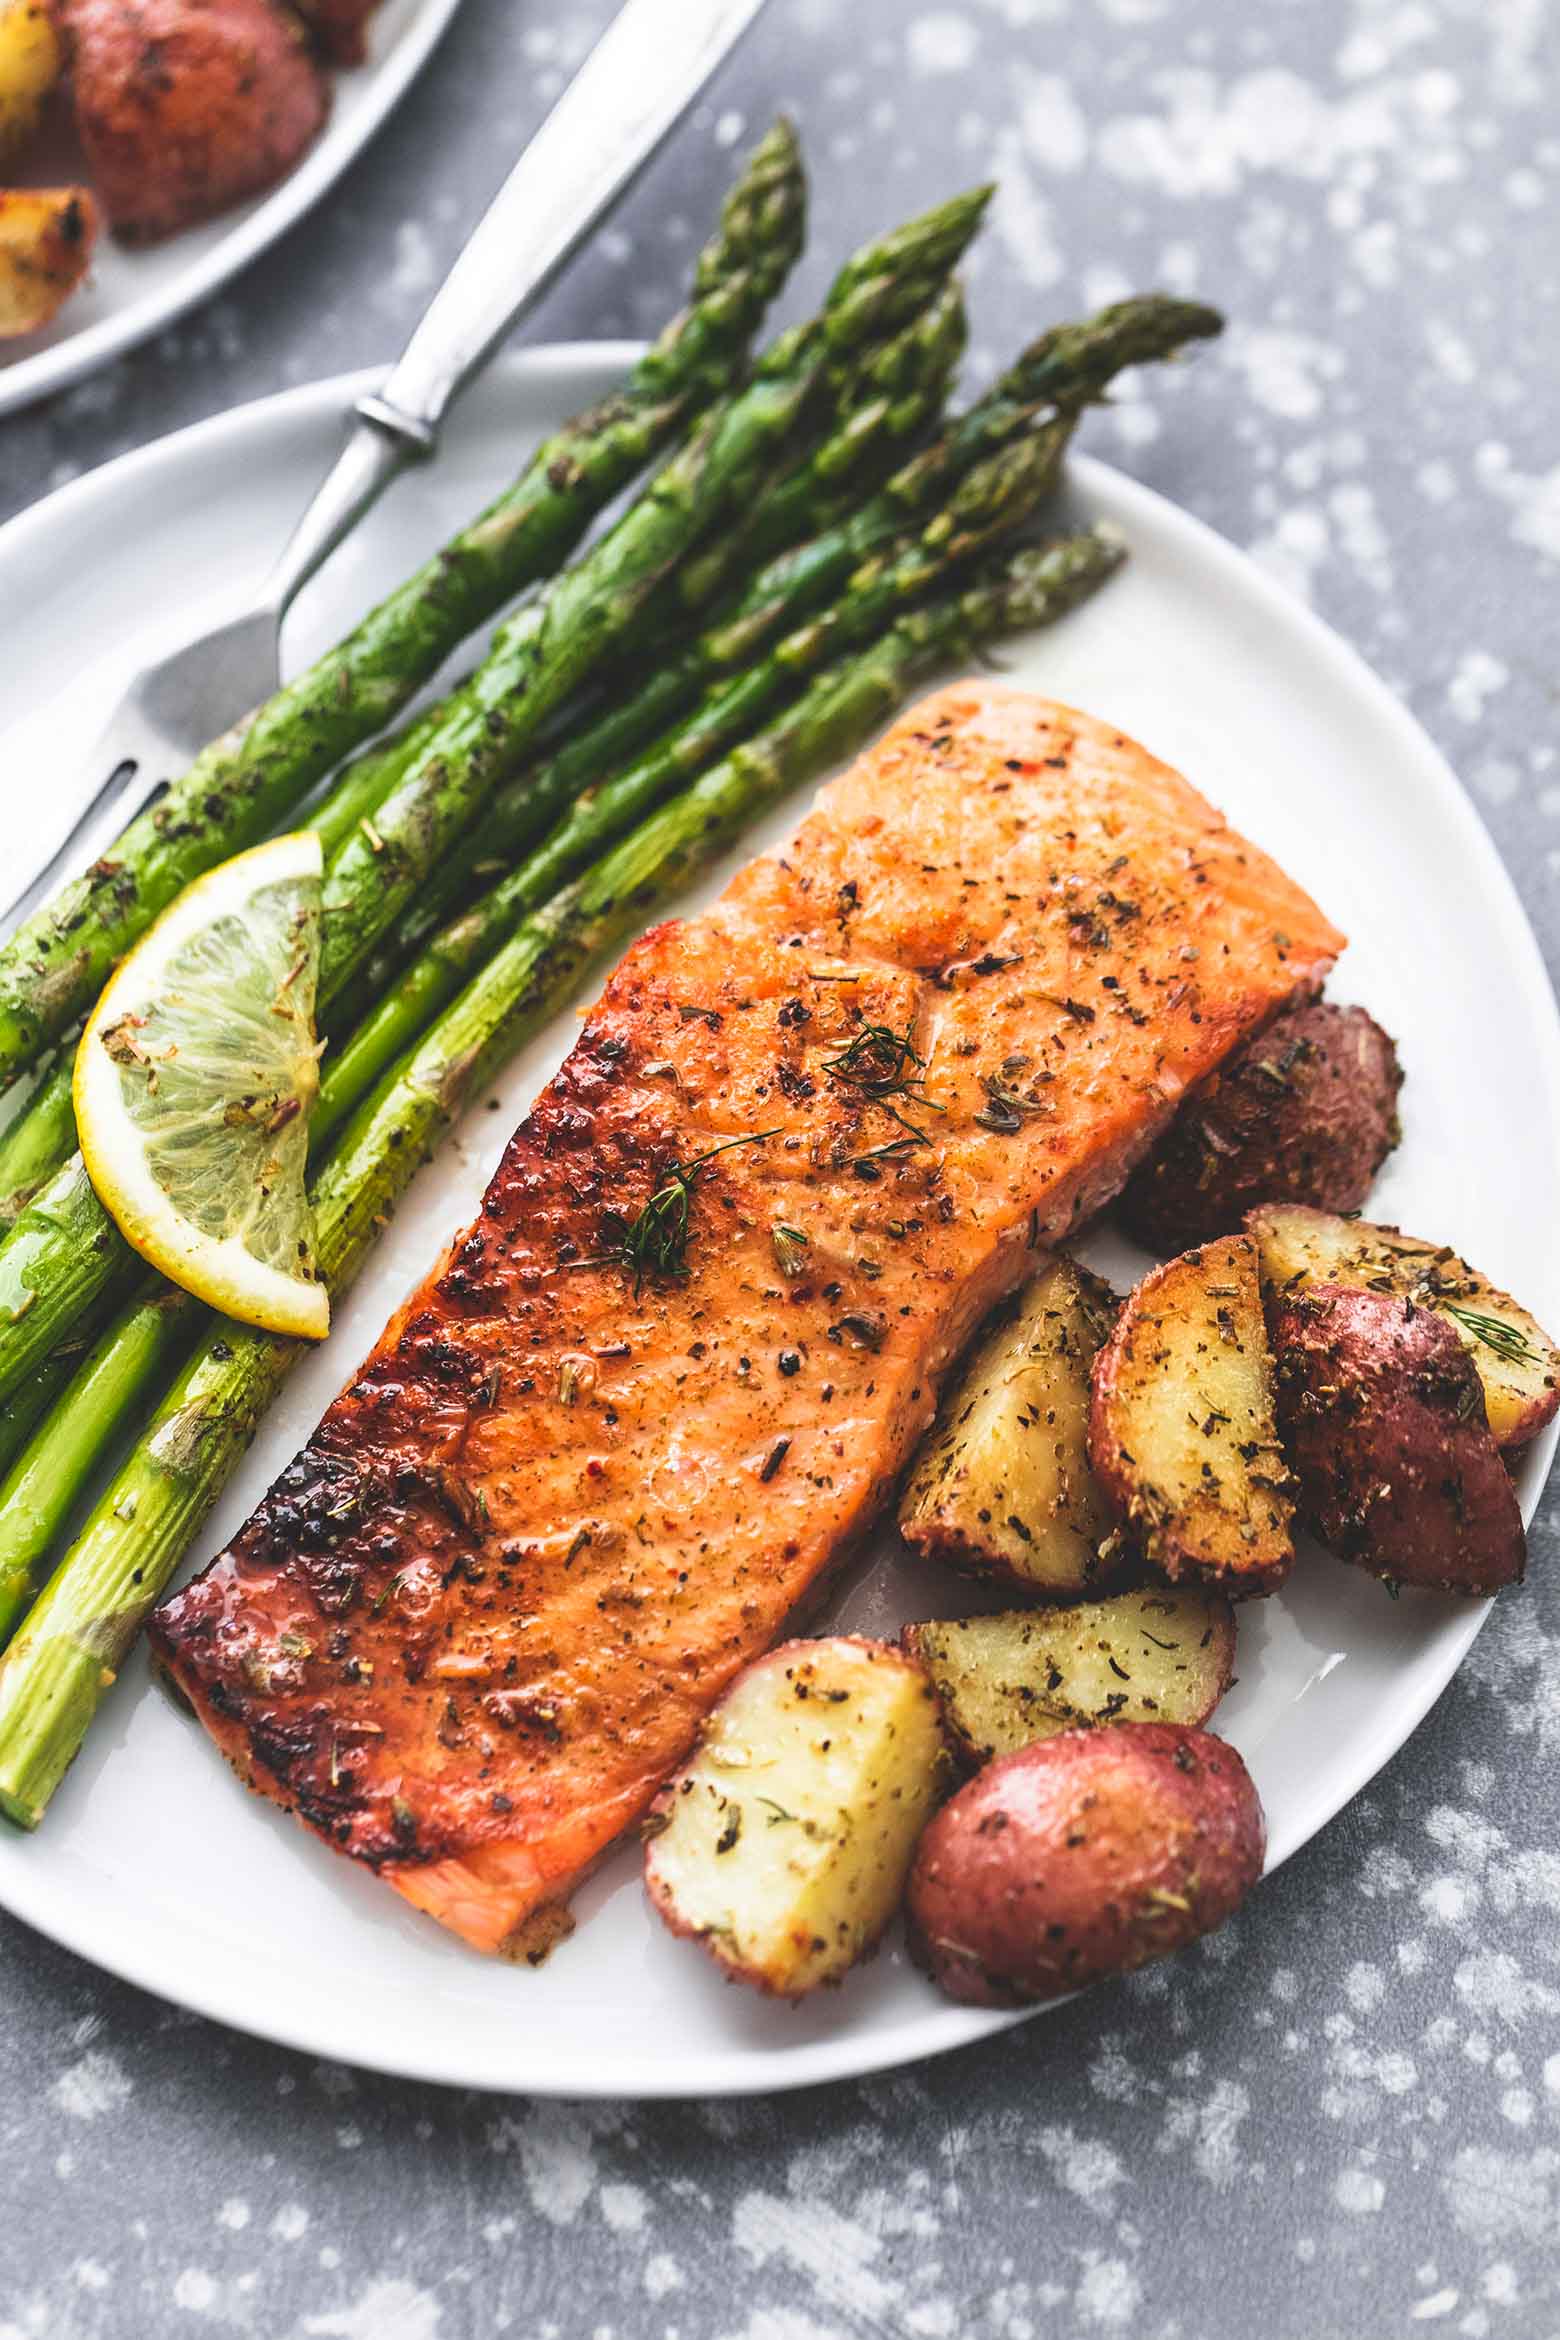 Roasted Orange-Thyme Grilled Salmon with a side of Roasted Lemon-Garlic Asparagus